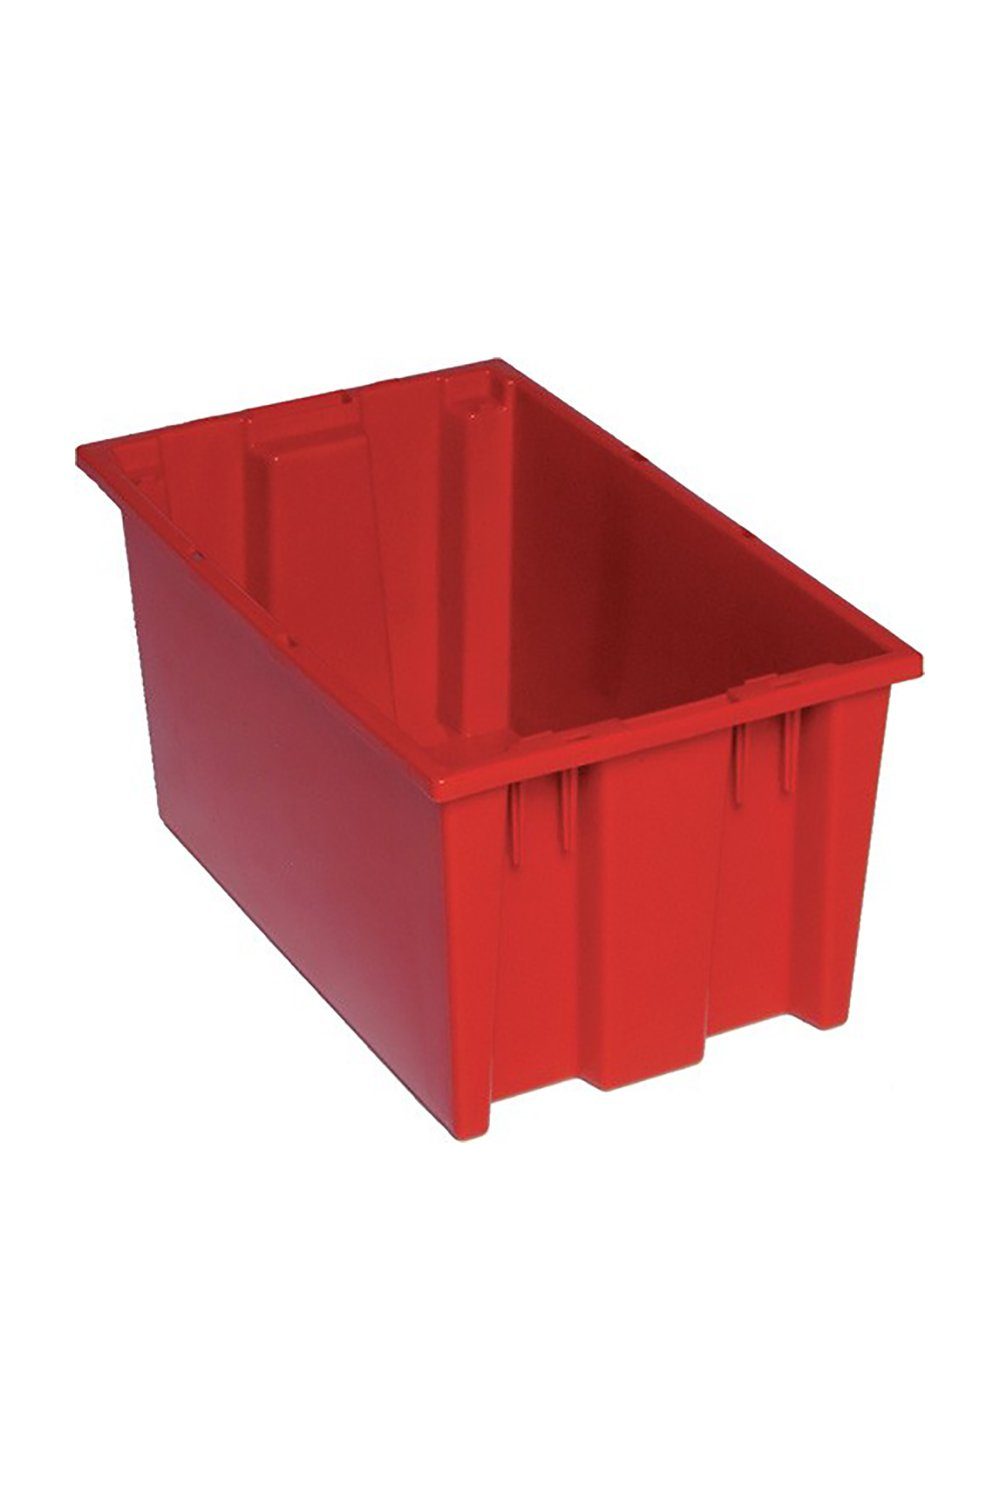 Stack and Nest Tote Bins & Containers Acart 18"L x 11"W x 9"H Red 